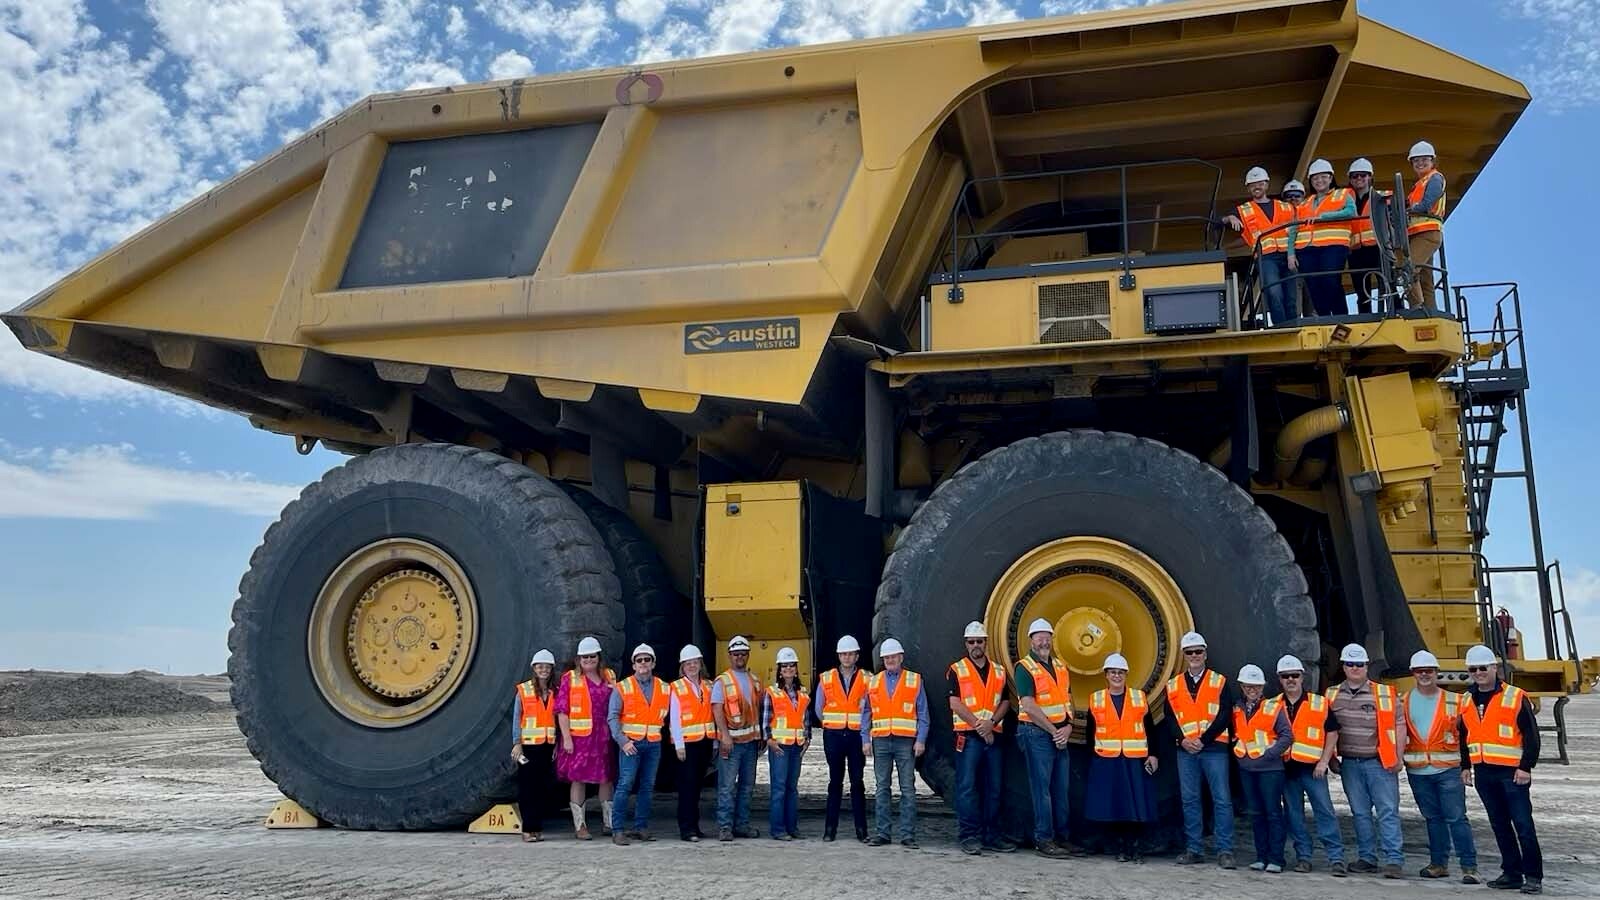 U.S. Rep. Pete Stauber, R-Minnesota, and U.S. Rep. Harriet Hageman, R-Wyoming, stand in the middle of Wyoming coal workers at the base of a haul truck at the rim of the Belle Ayr coal mine owned by Eagle Specialty Materials near Gillette. The lawmakers, who were joined by some staff members of the subcommittee on energy and mineral resources, met on Tuesday with miners and company representatives of Eagle Speciality Materials.